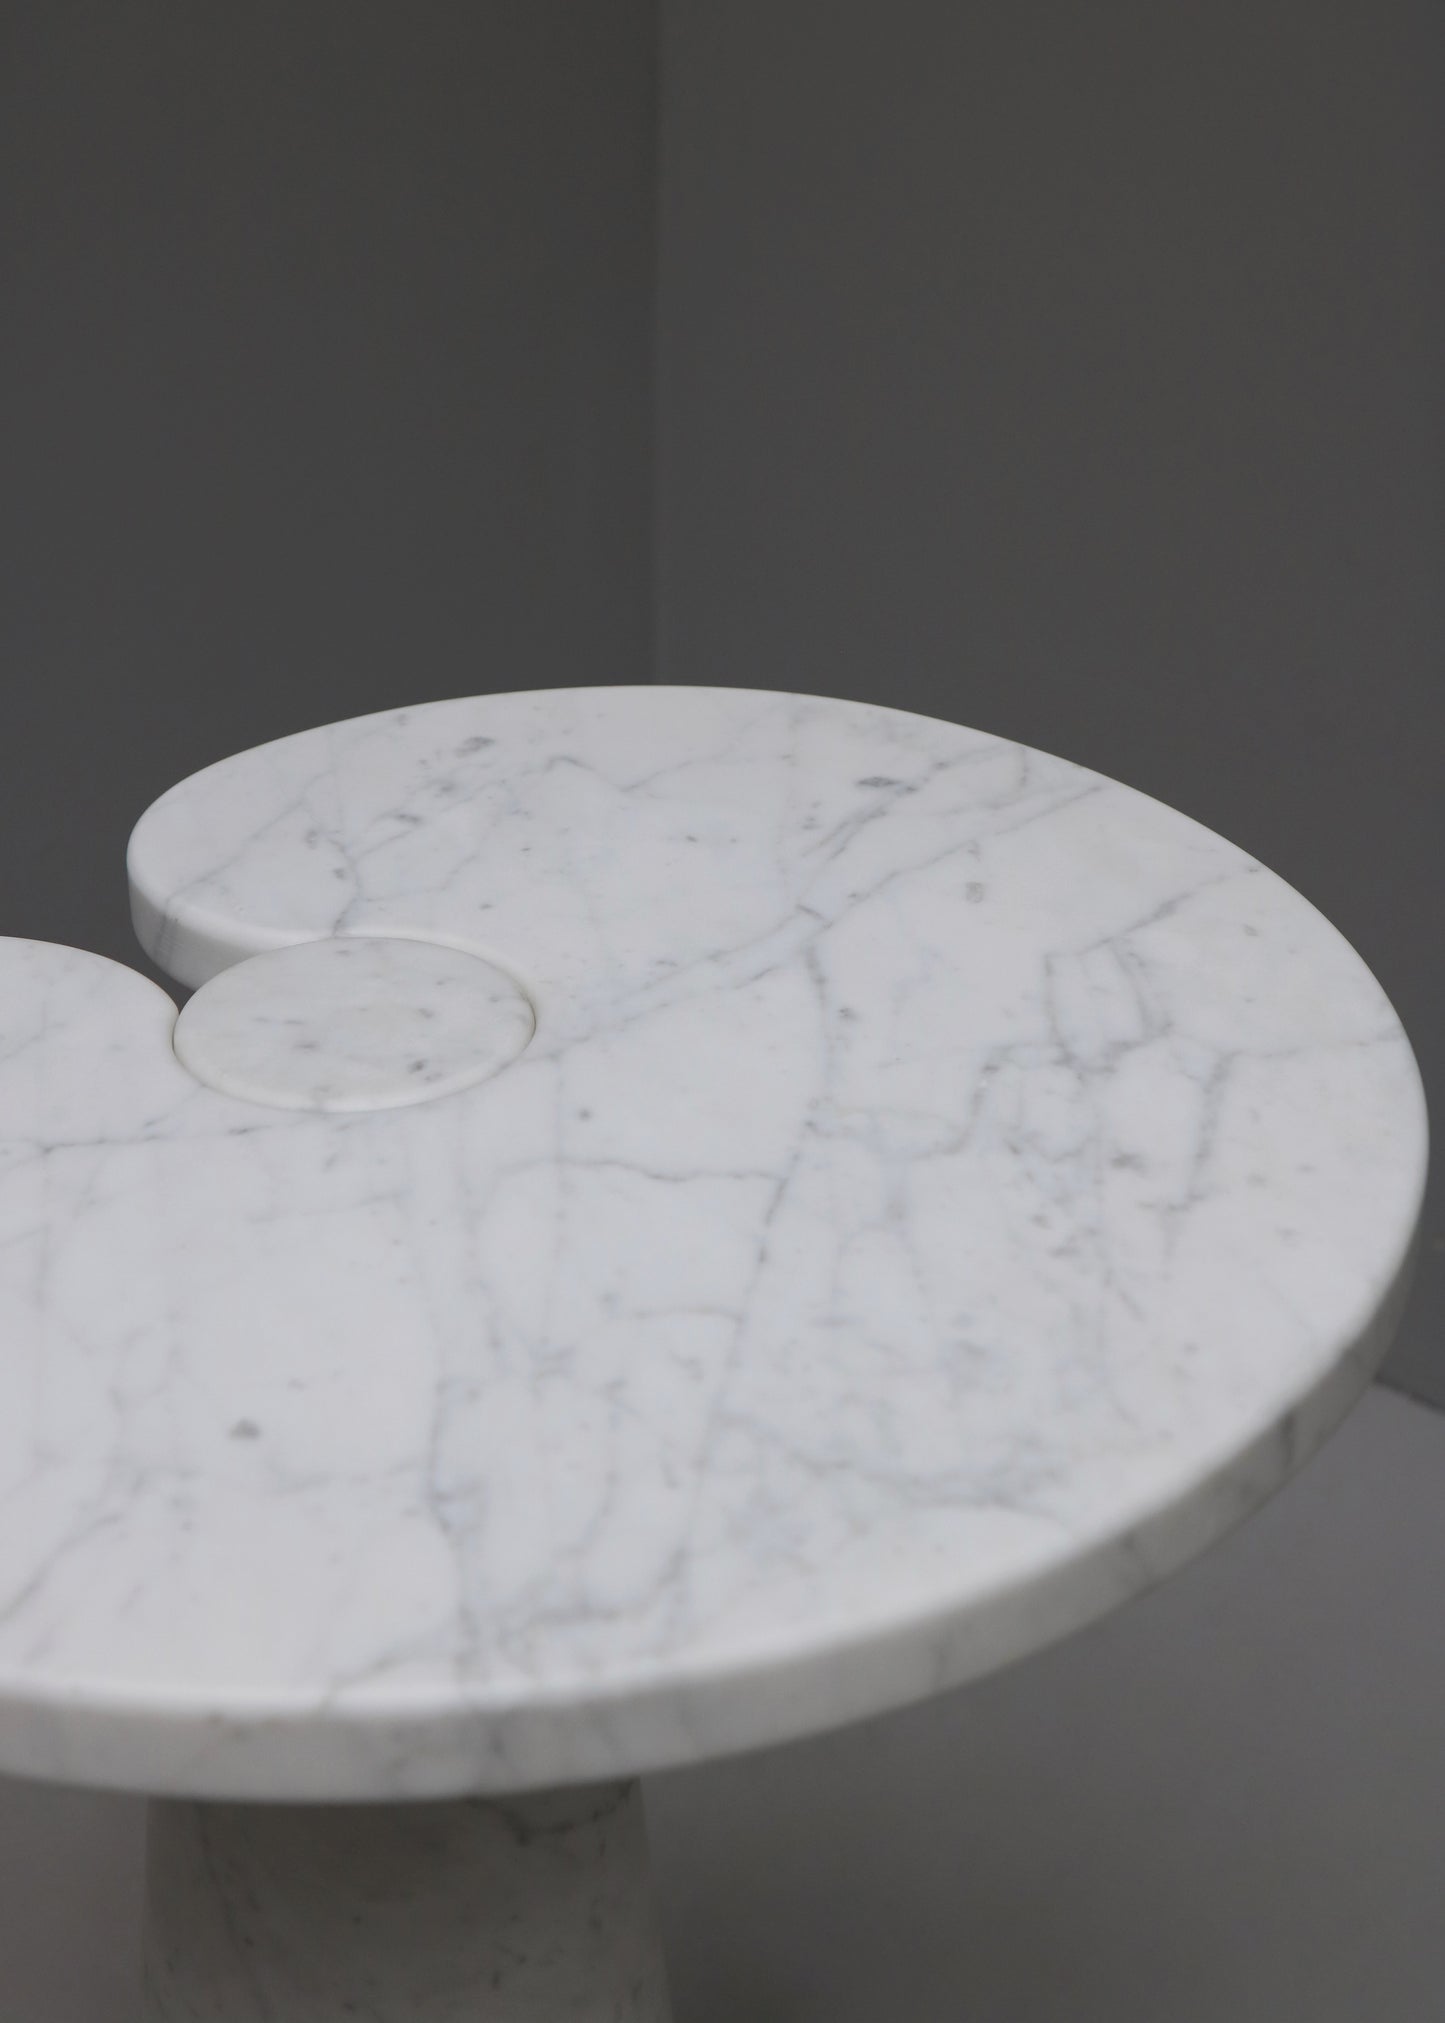 "EROS MARBLE SIDE TABLE" BY ANGELO MANGIAROTTI